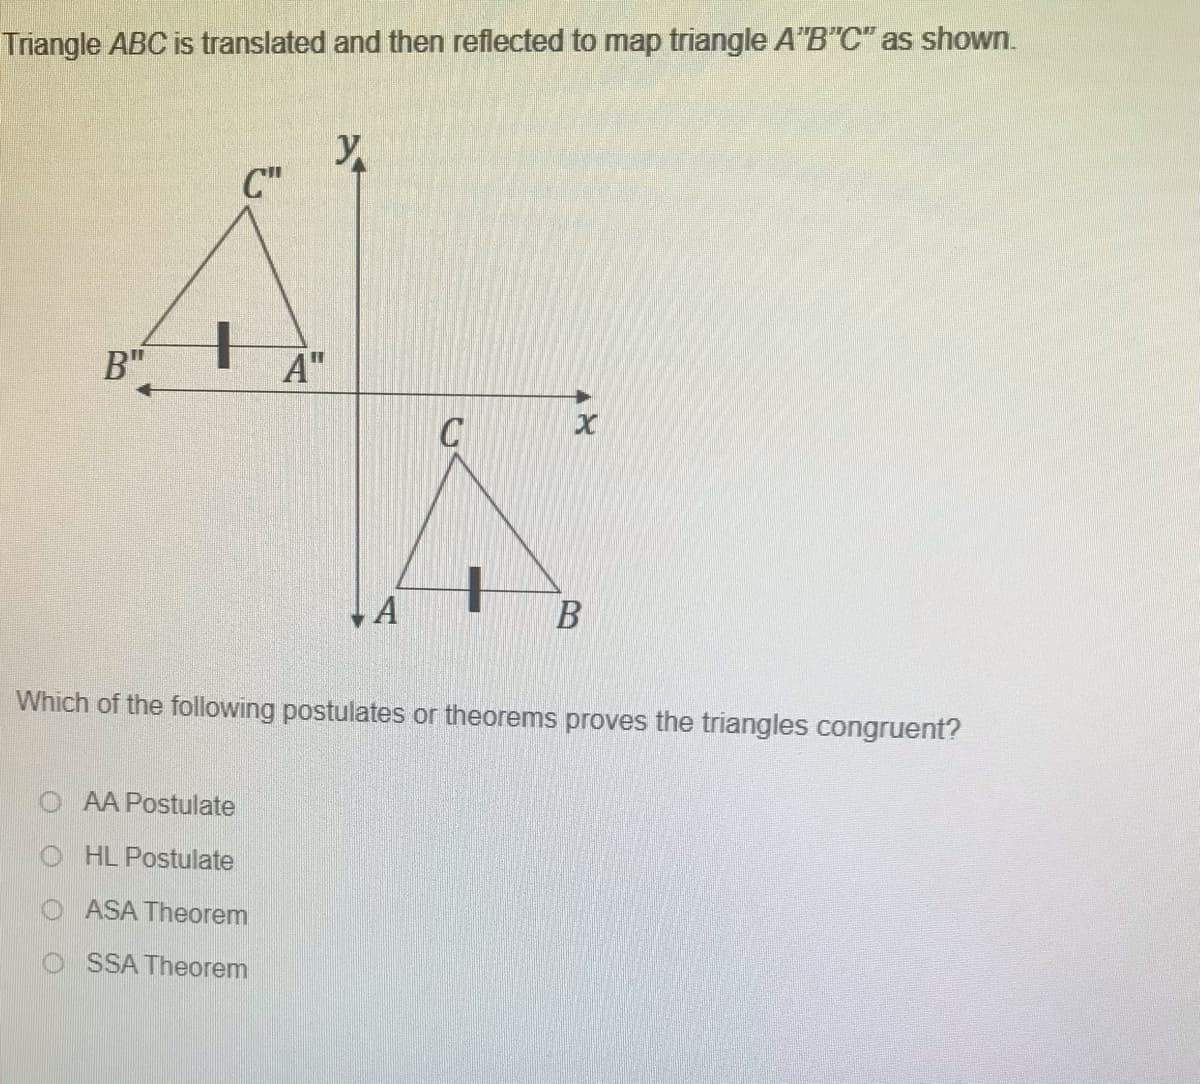 Triangle ABC is translated and then reflected to map triangle A"B"C" as shown.
y
C"
B"
A"
C
Which of the following postulates or theorems proves the triangles congruent?
AA Postulate
O HL Postulate
ASA Theorem
O SSA Theorem
